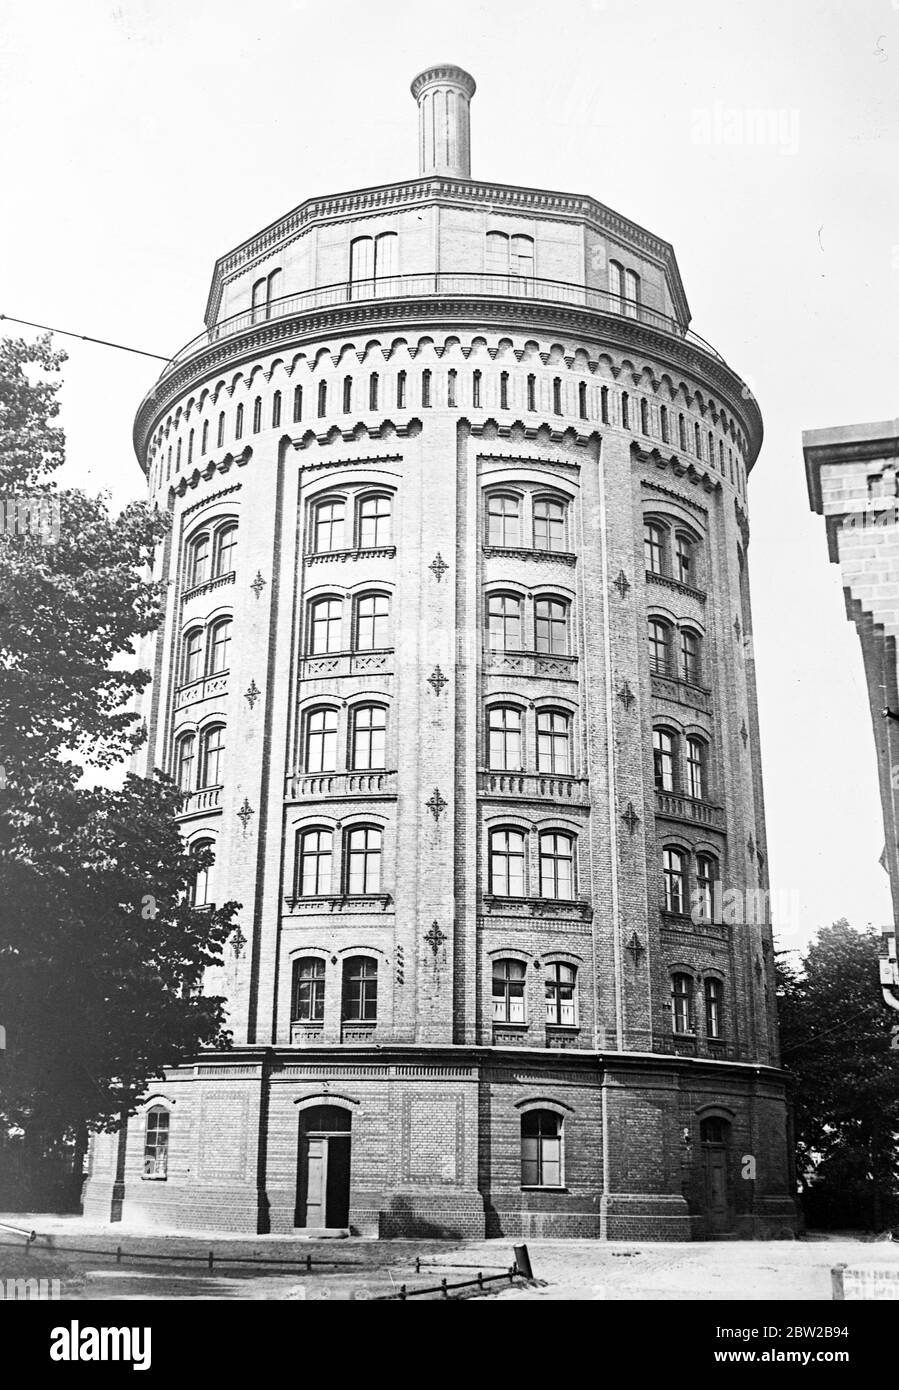 Novel apartment house. A distinguish water tower in Berlin, which has been most satisfactorily adapted as flats for working people. Each flat is lit by electric light, and has an admirable water supply. Owing to the house shortage in Germany, many disused buildings are being adapted in this fashion. 7 September 1929 Stock Photo